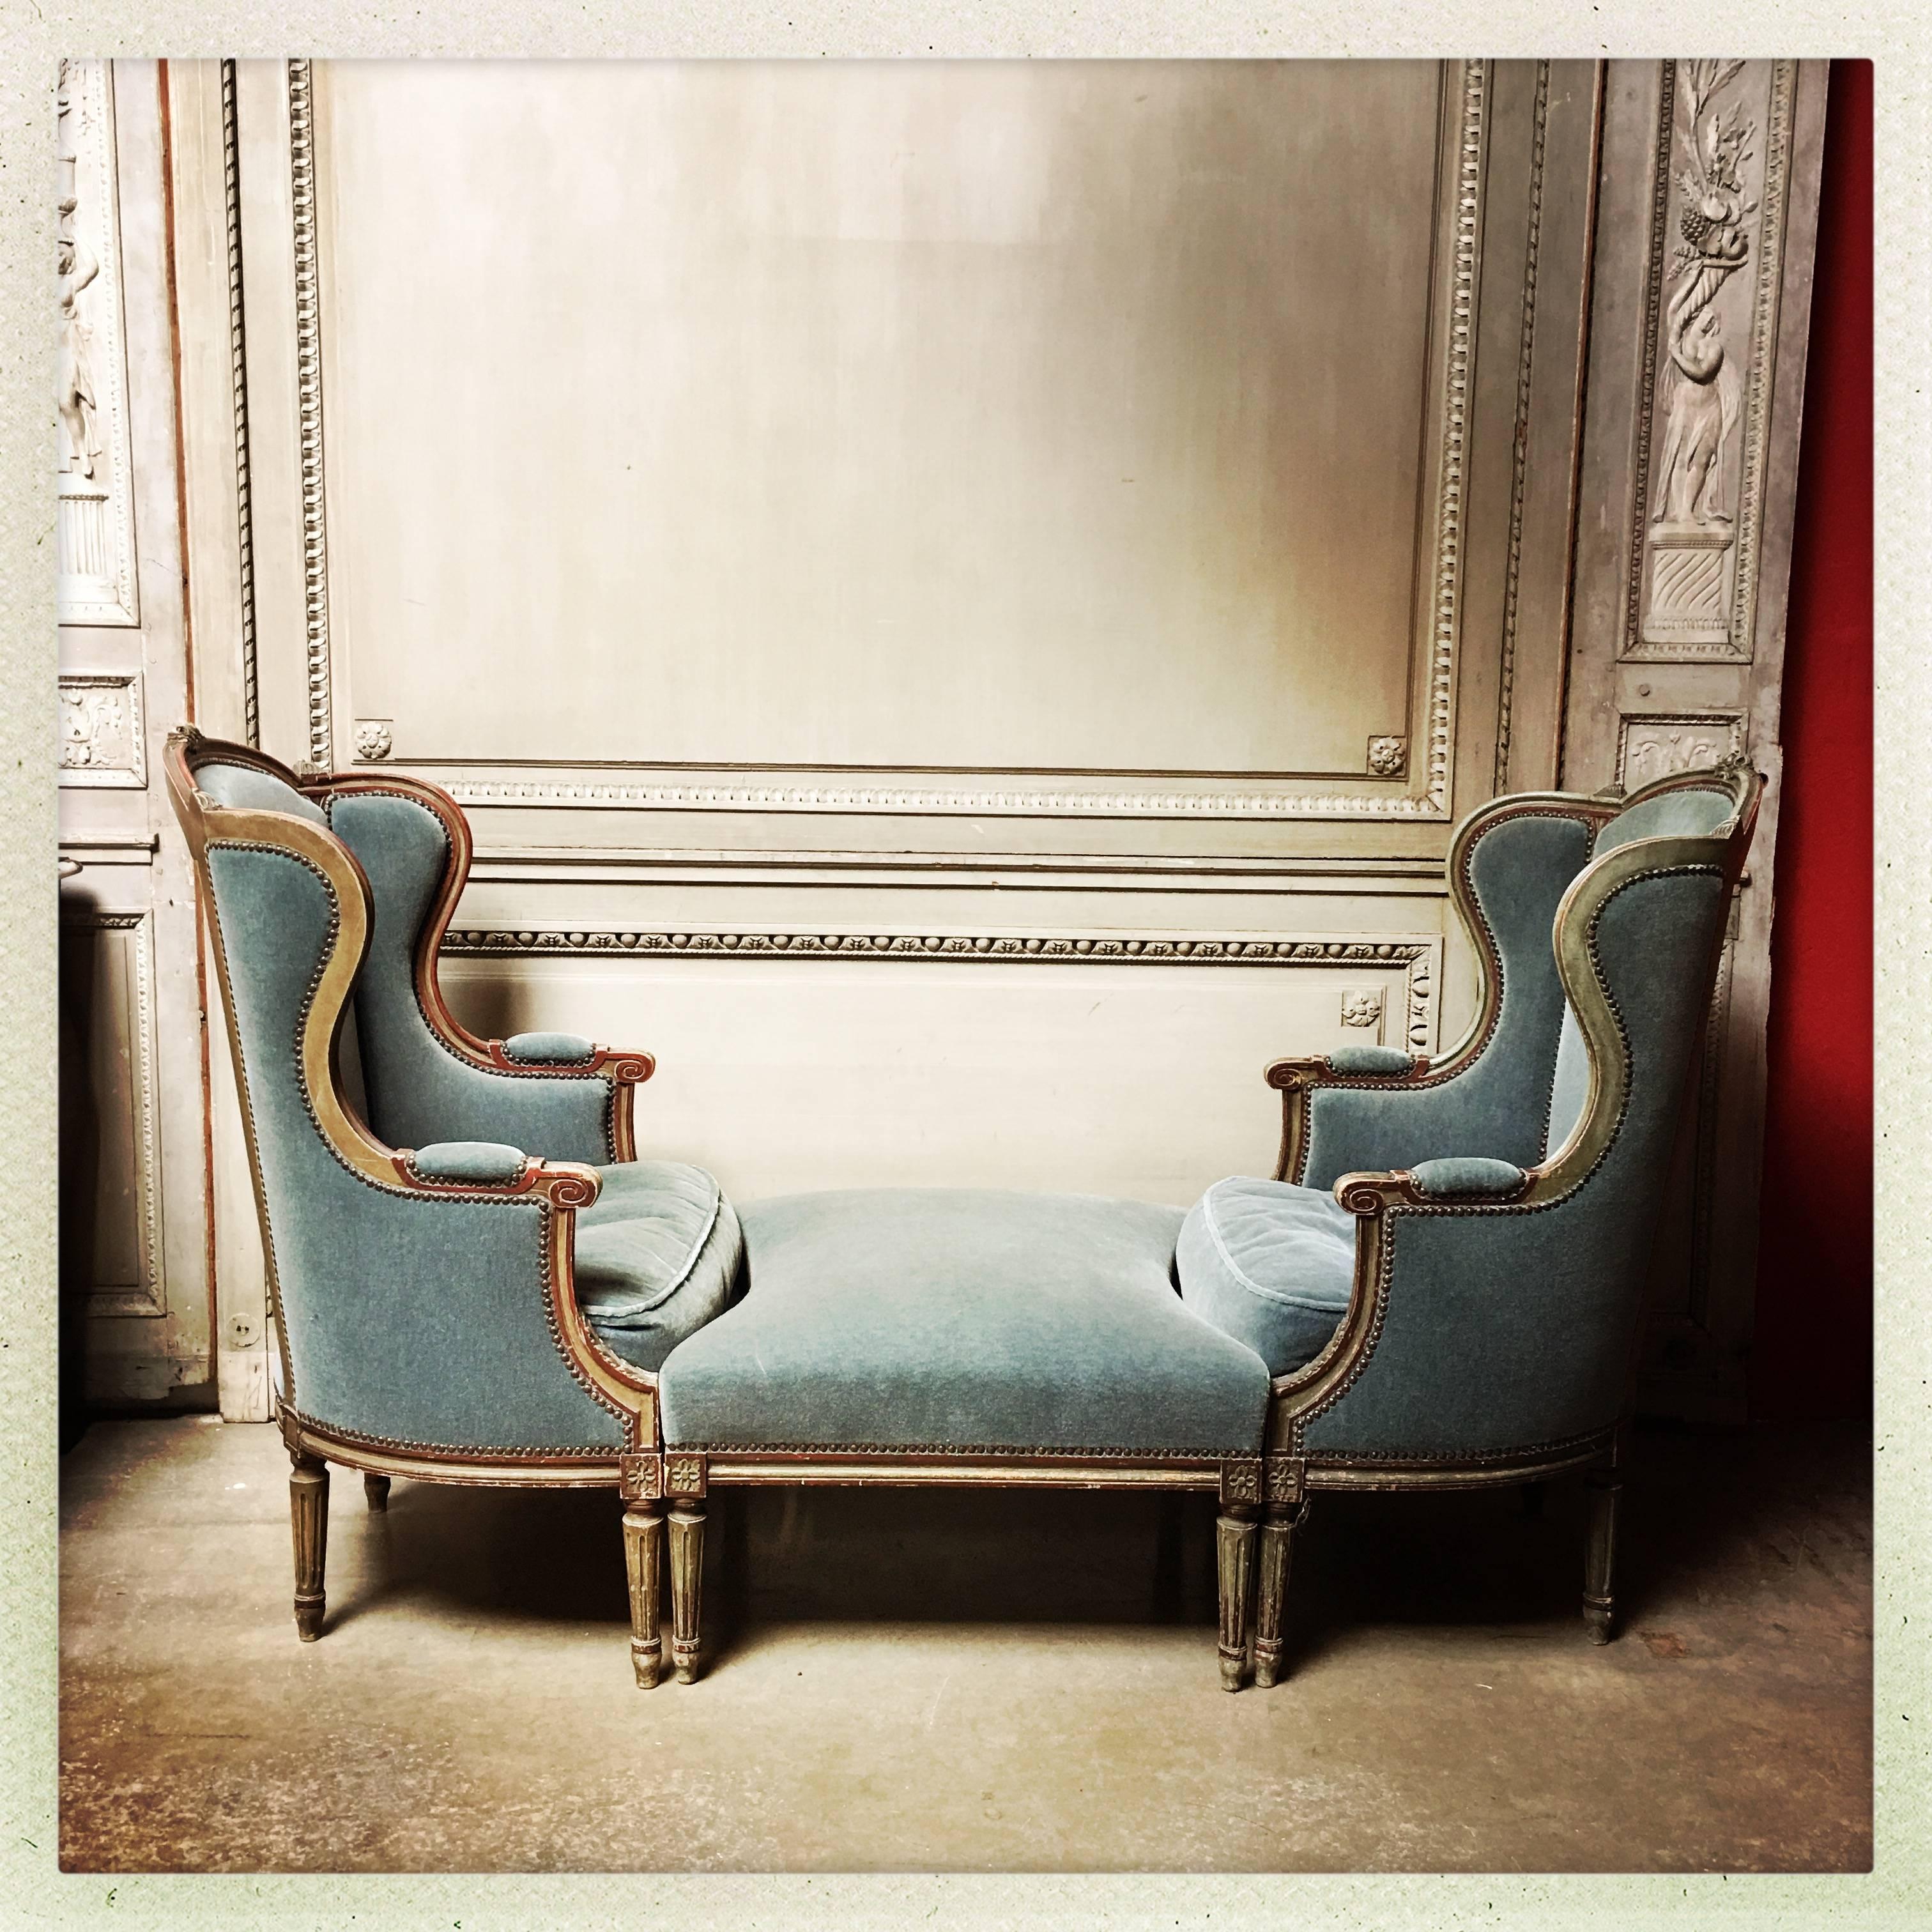 A French Louis XVI style three-piece Duchesse Brisee with a painted finish.